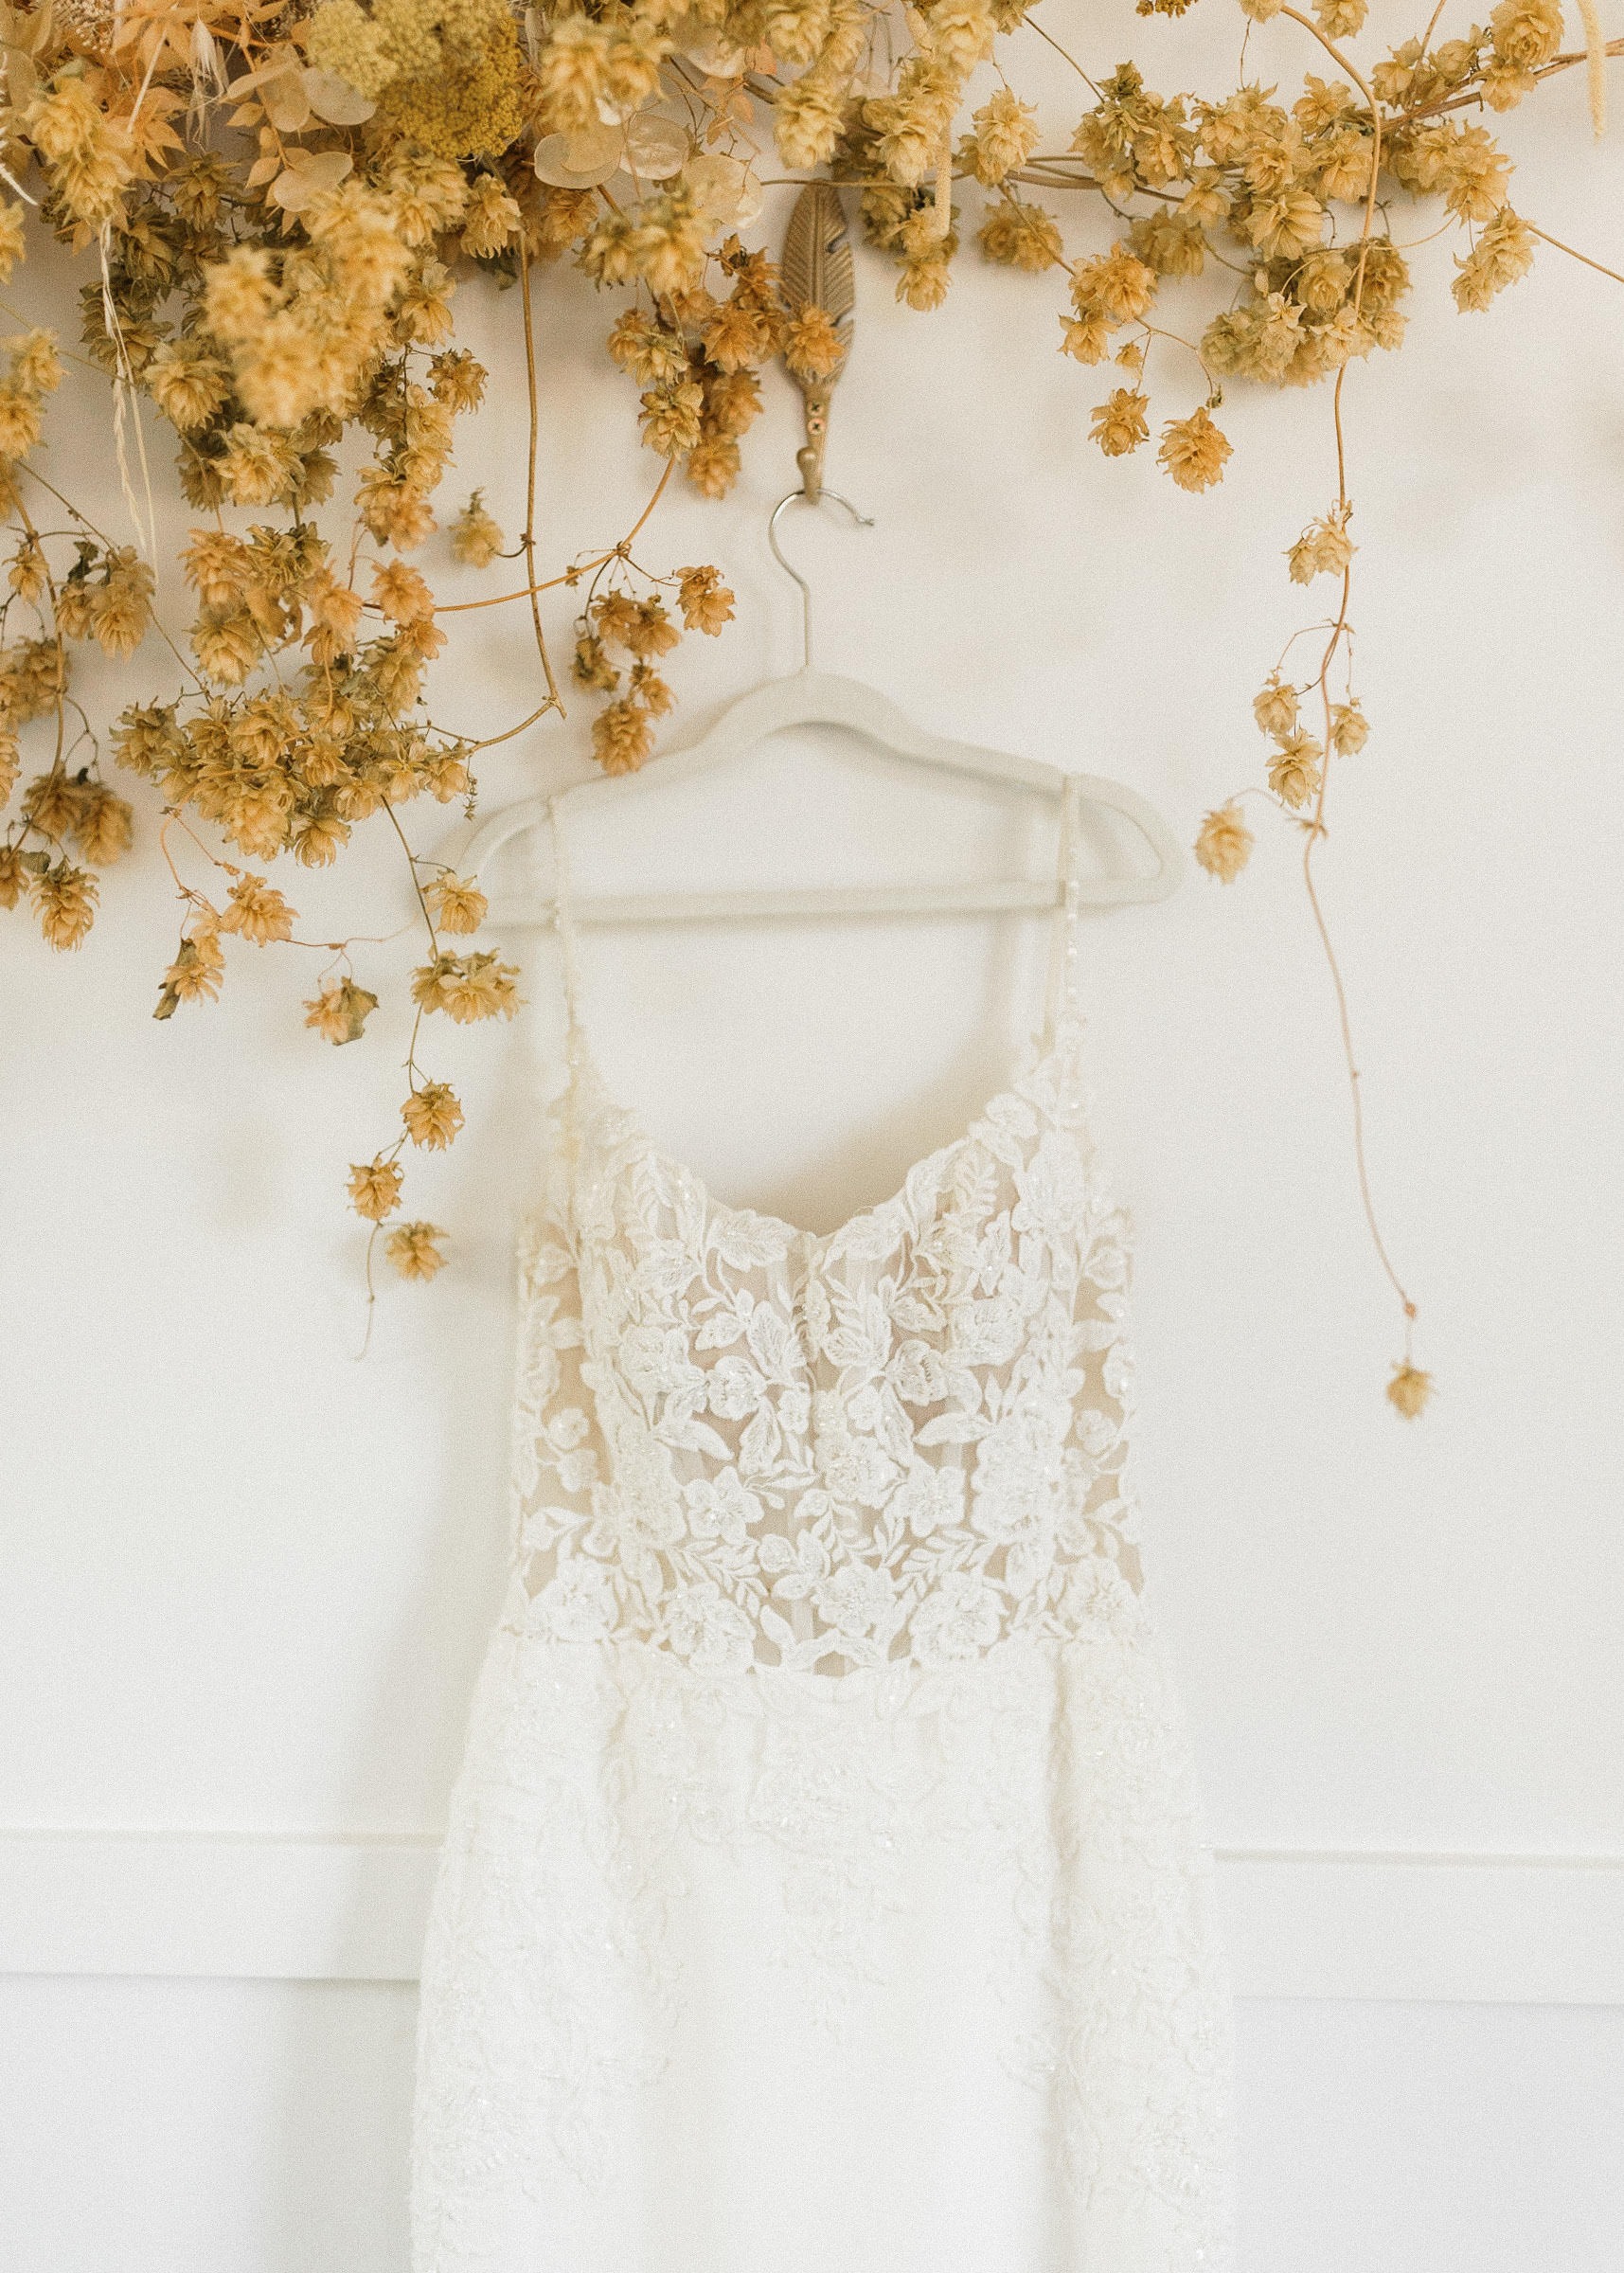 A white wedding dress hanging on a white wall beneath gold-hued dried hop vines